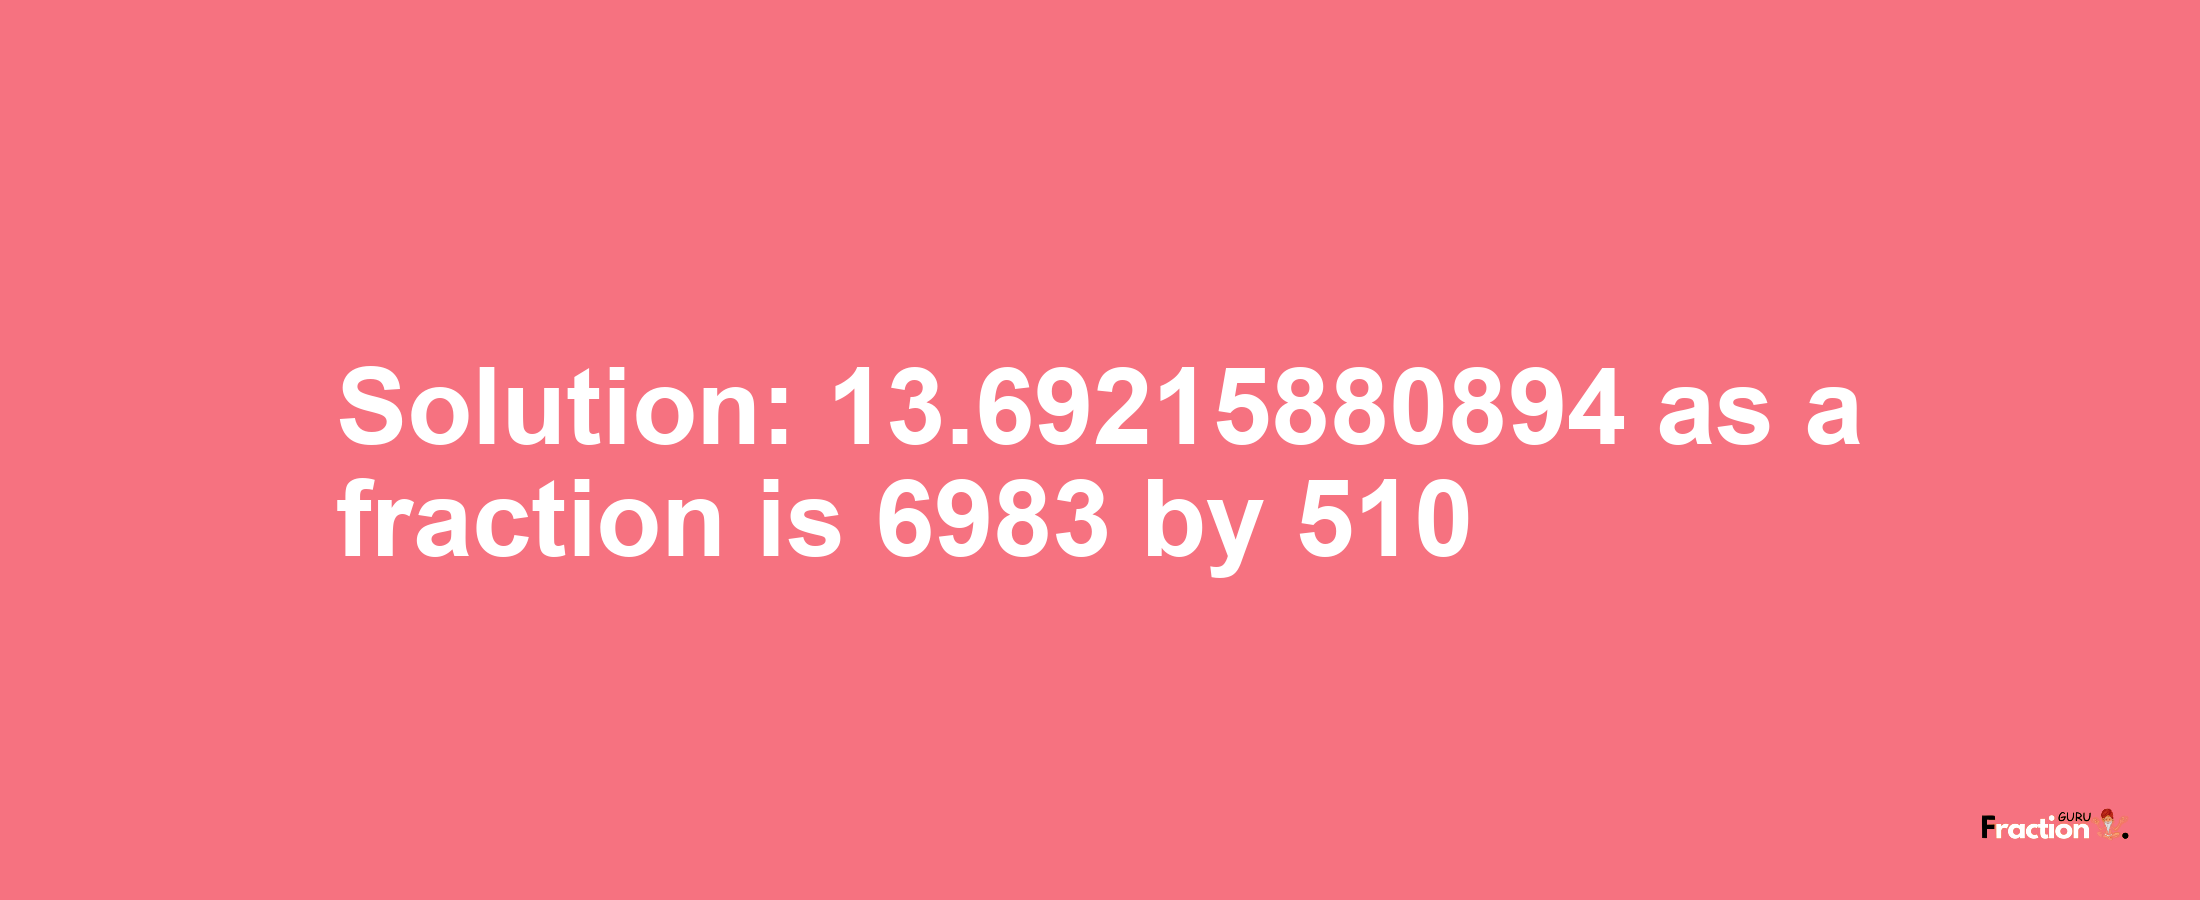 Solution:13.69215880894 as a fraction is 6983/510